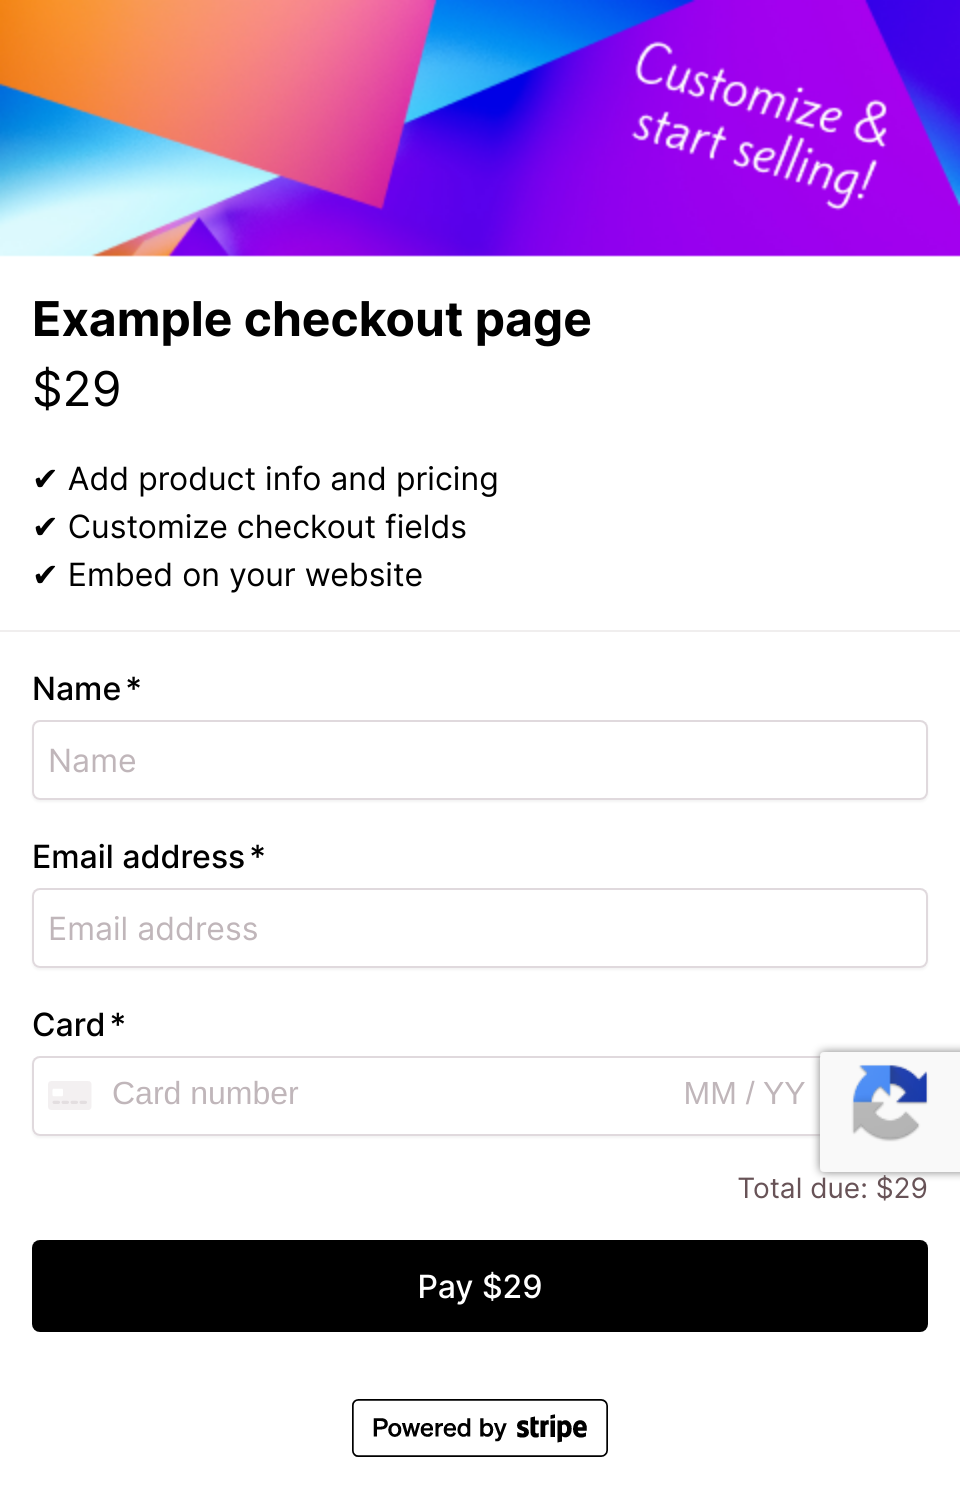 Example checkout page